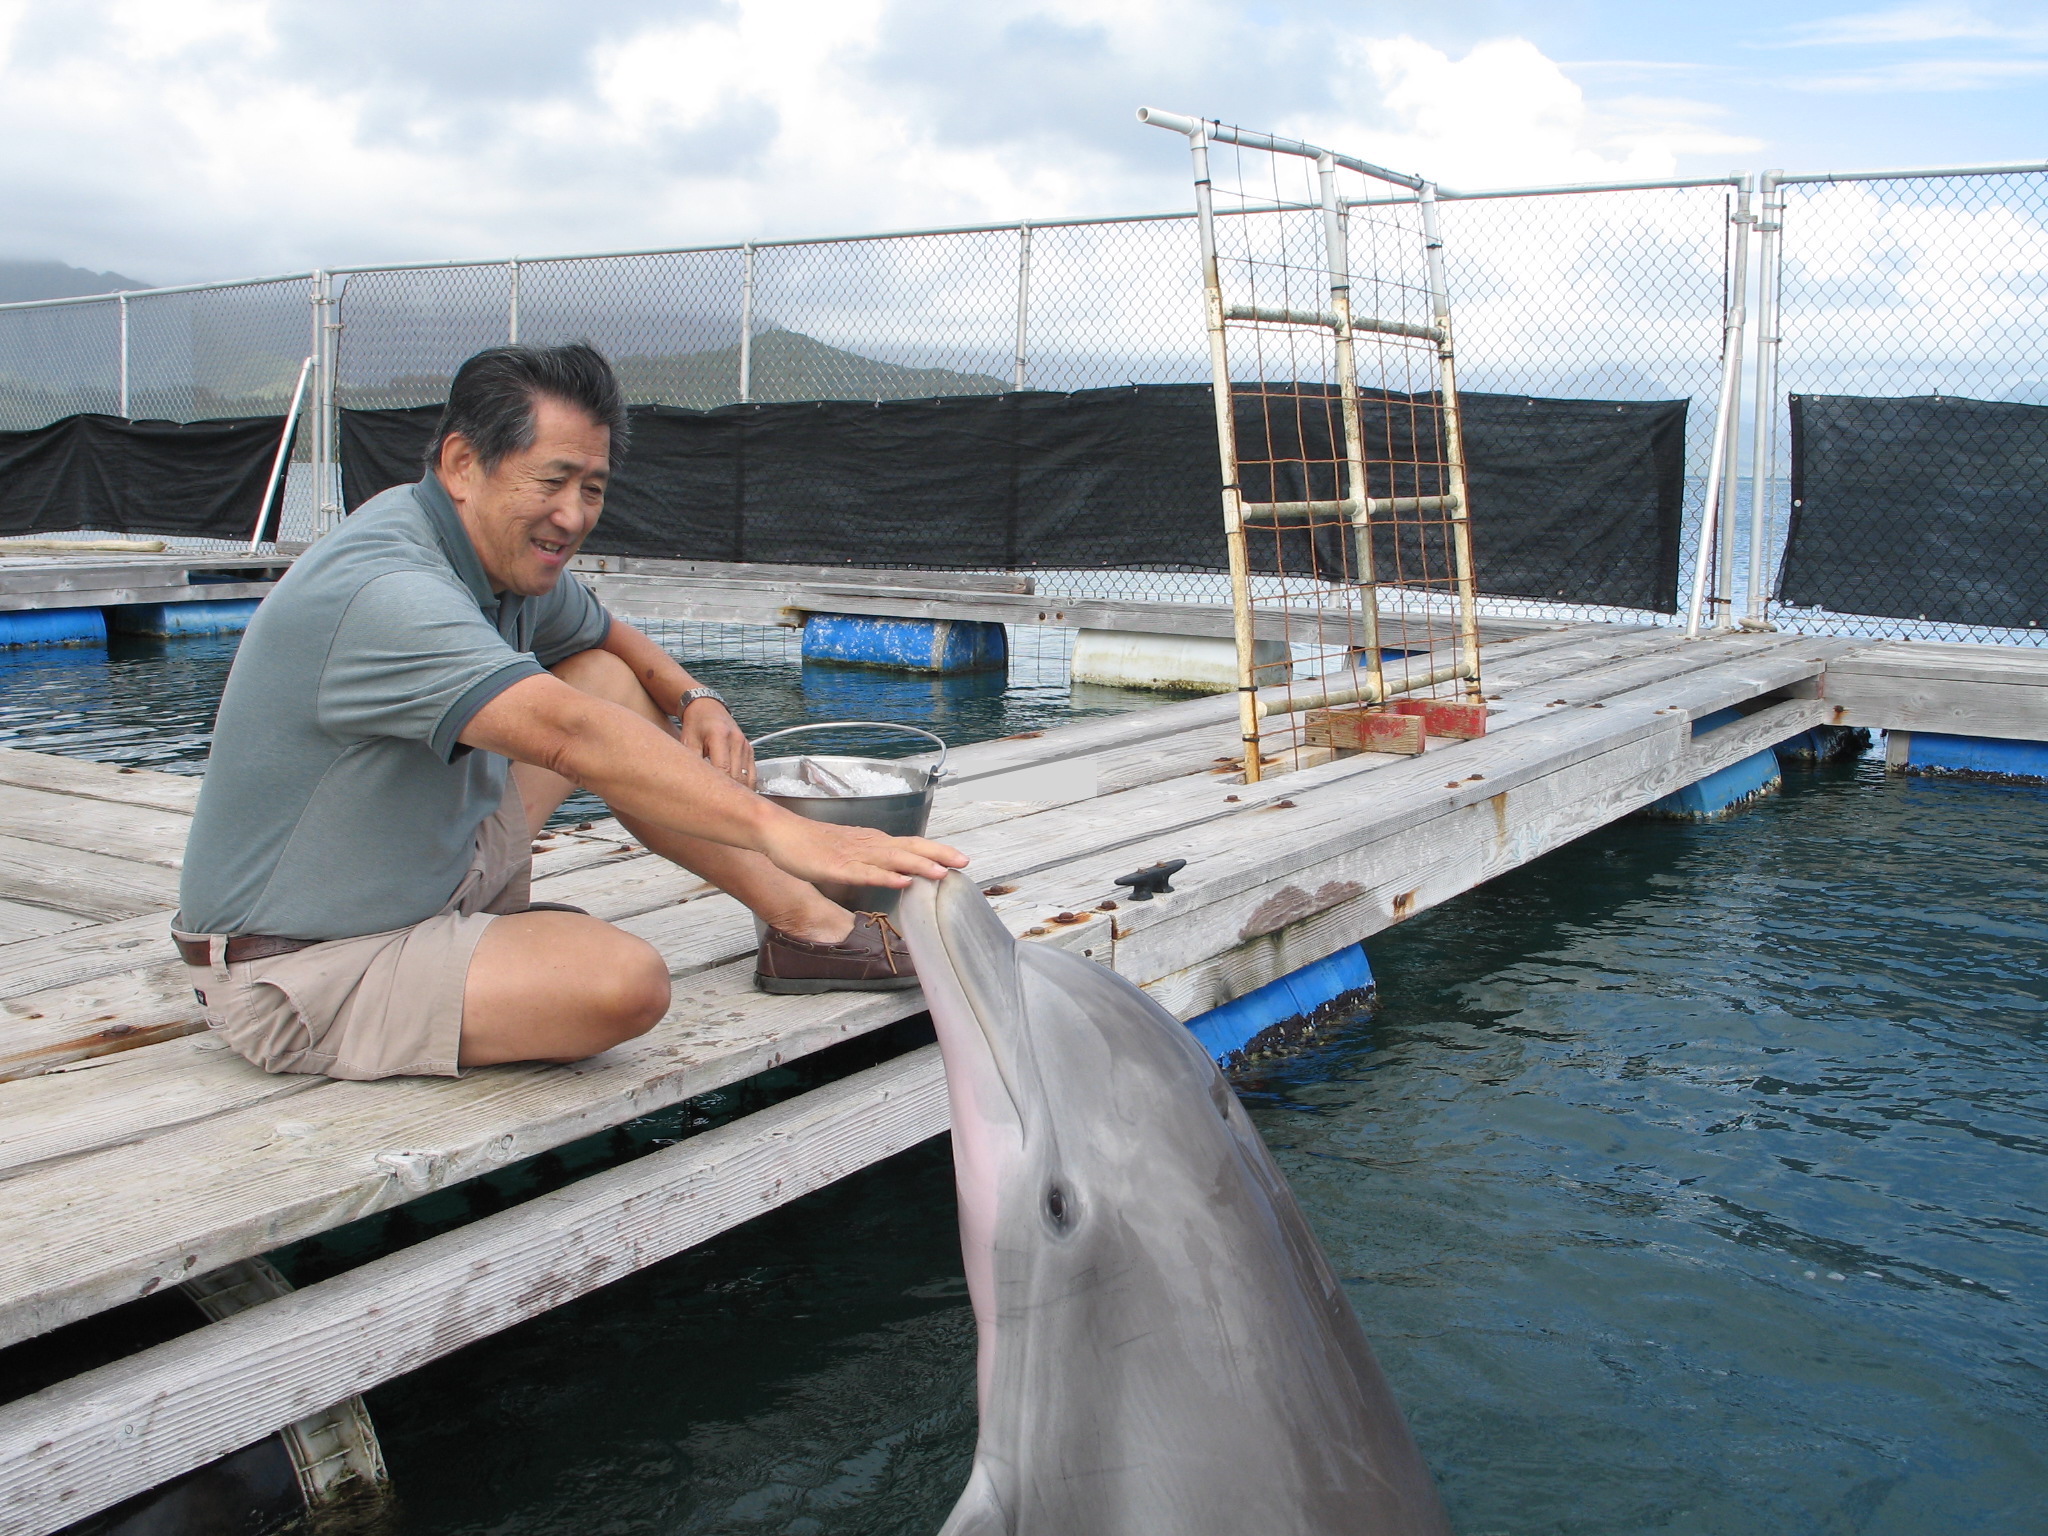 Whitlow Au at Hawaiʻi Institute of Marine Biology with dolphin BJ.